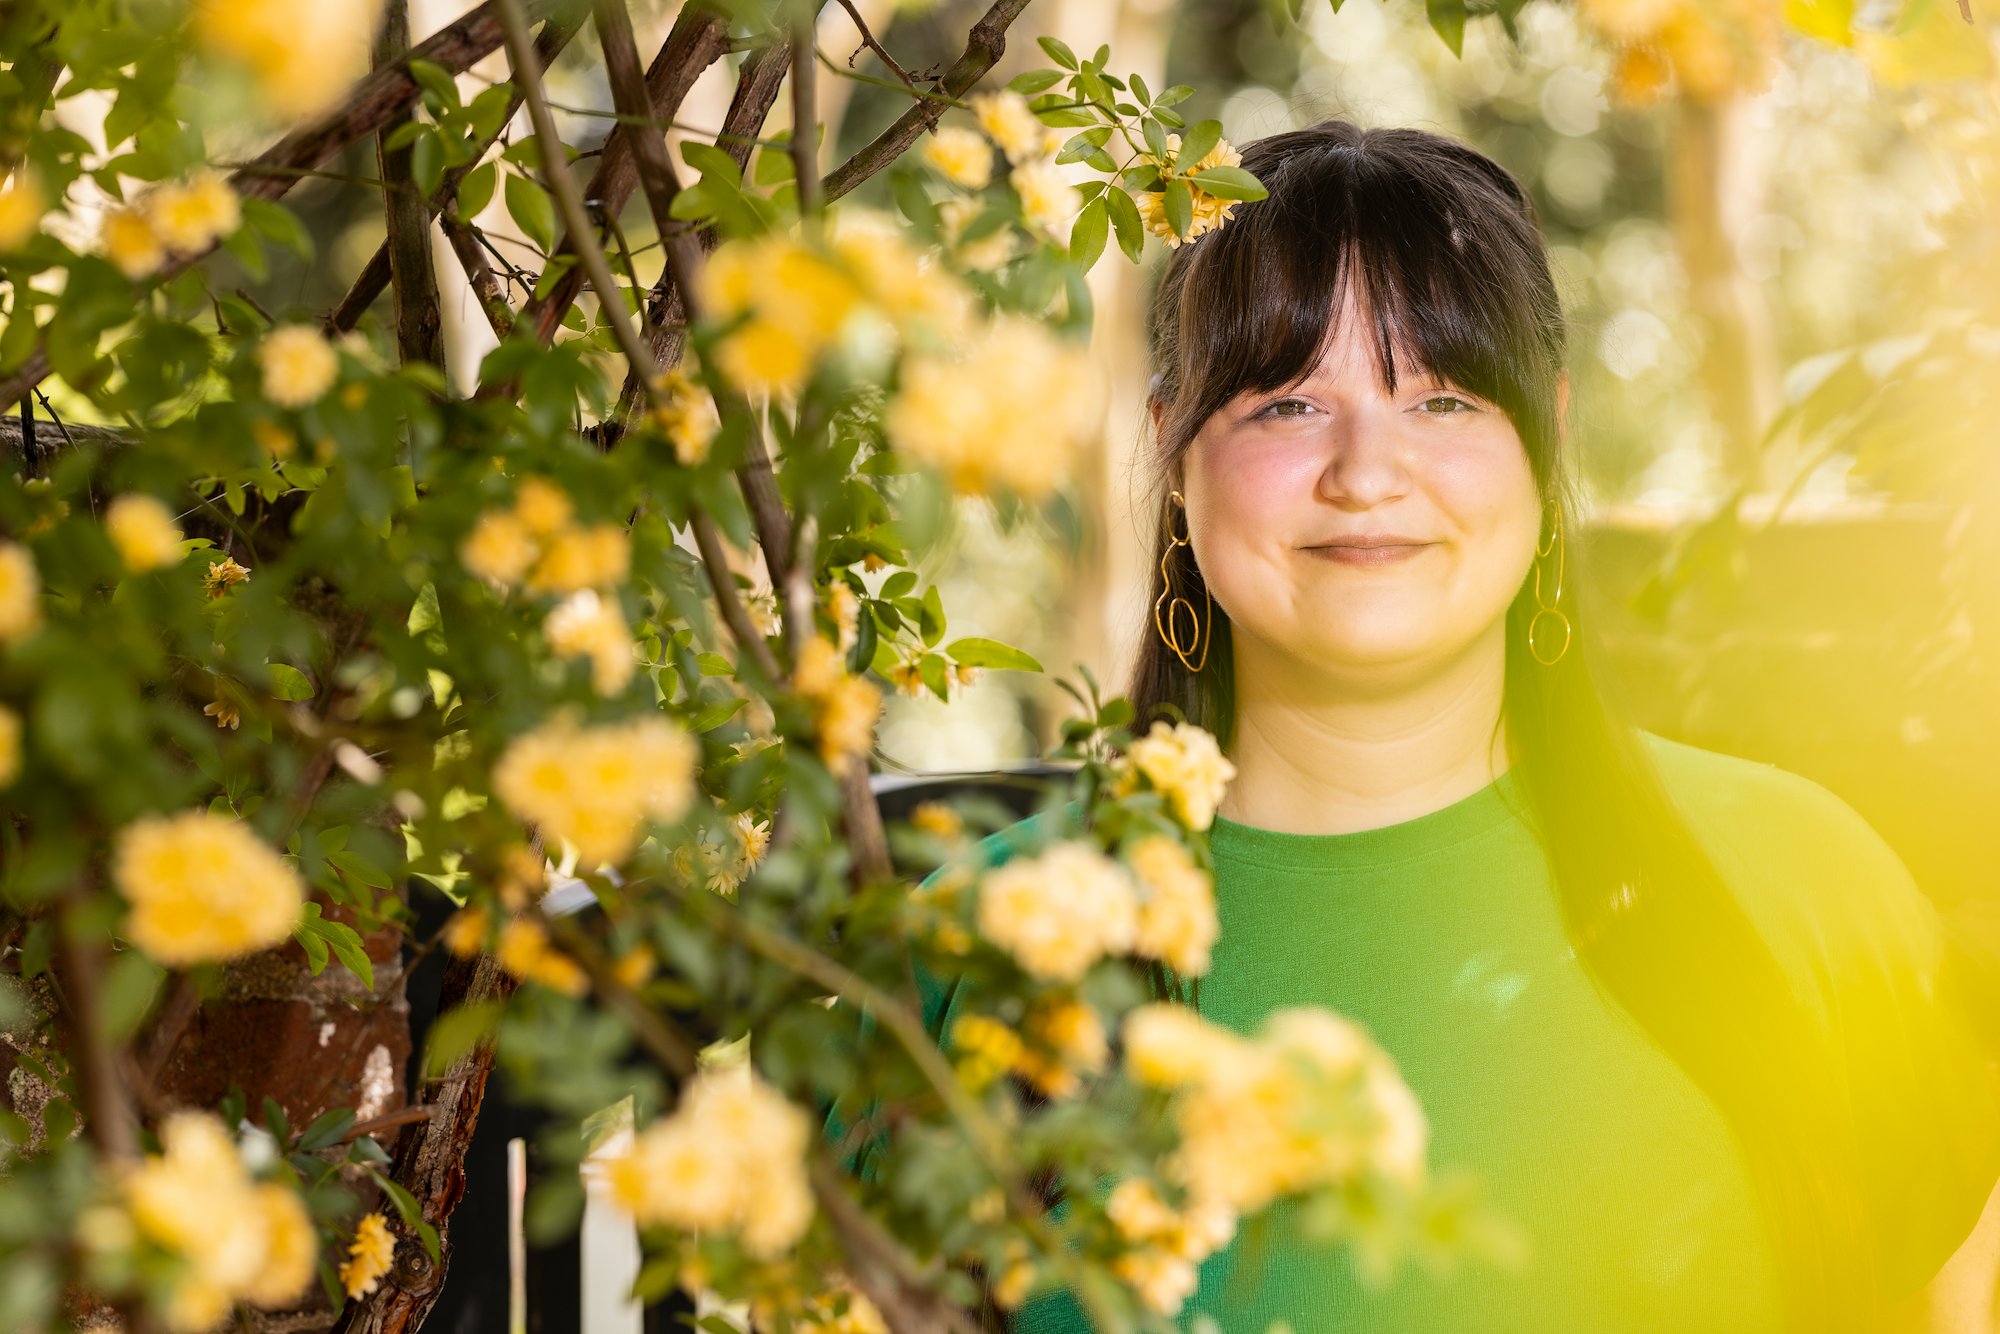 A white woman with dark bangs and long dark hair is wearing a green shirt and dangly gold earrings as she stands peeking out of a host of yellow flowers in a garden.